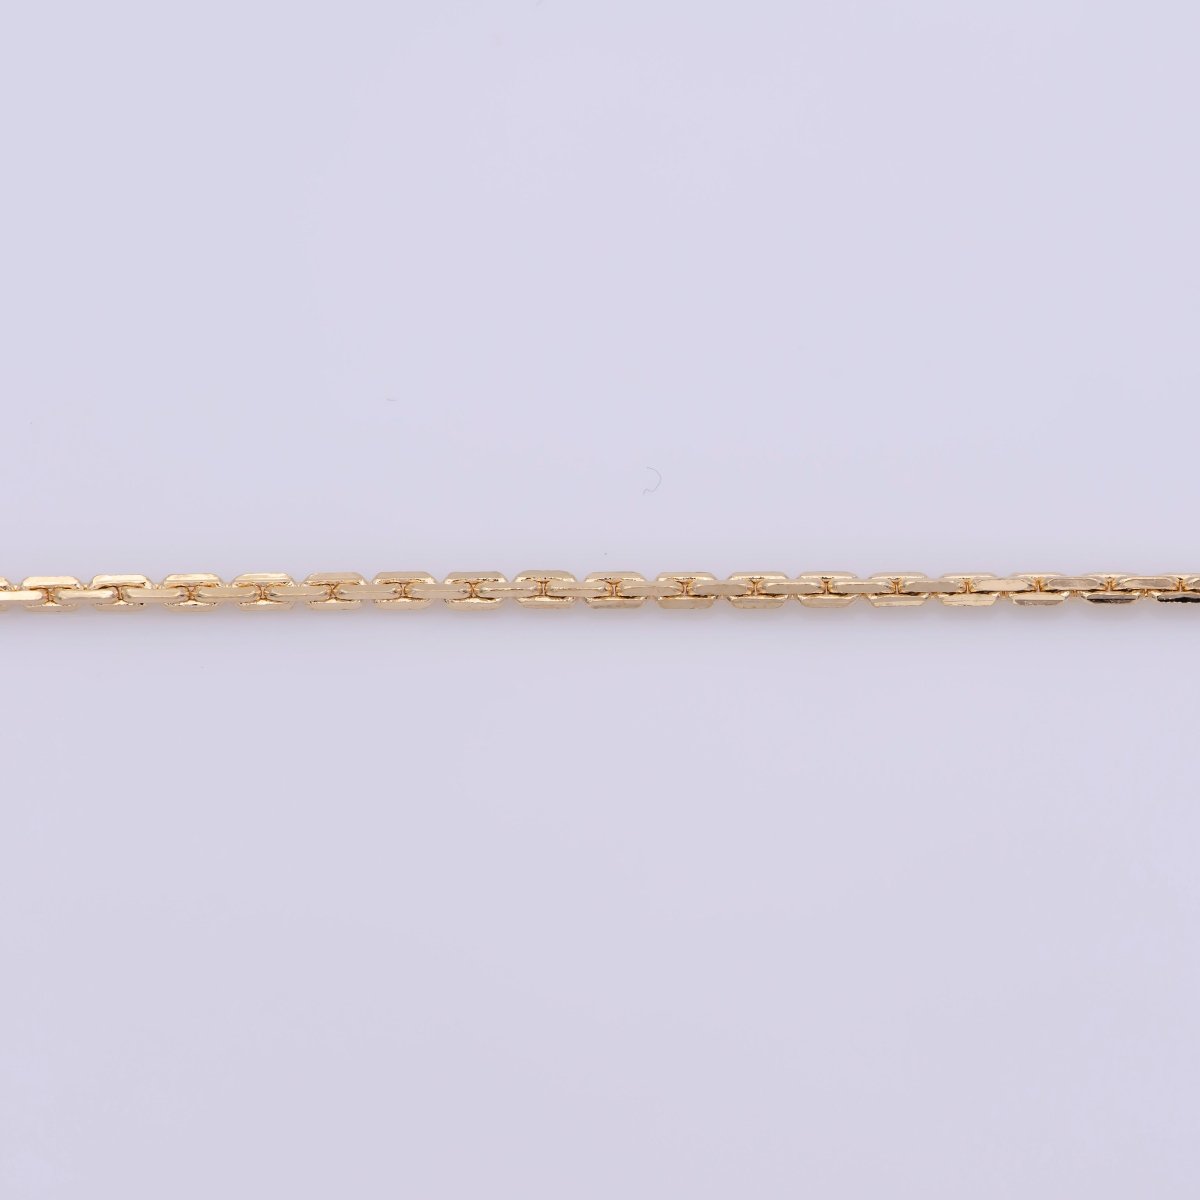 19.5 inch Cable Chain Necklace, 18K Gold Plated Finished Chain For Jewelry Necklace Making, Dainty 1.4mm Cable Necklace w/ Lobster Clasps | CN-377 Clearance Pricing - DLUXCA